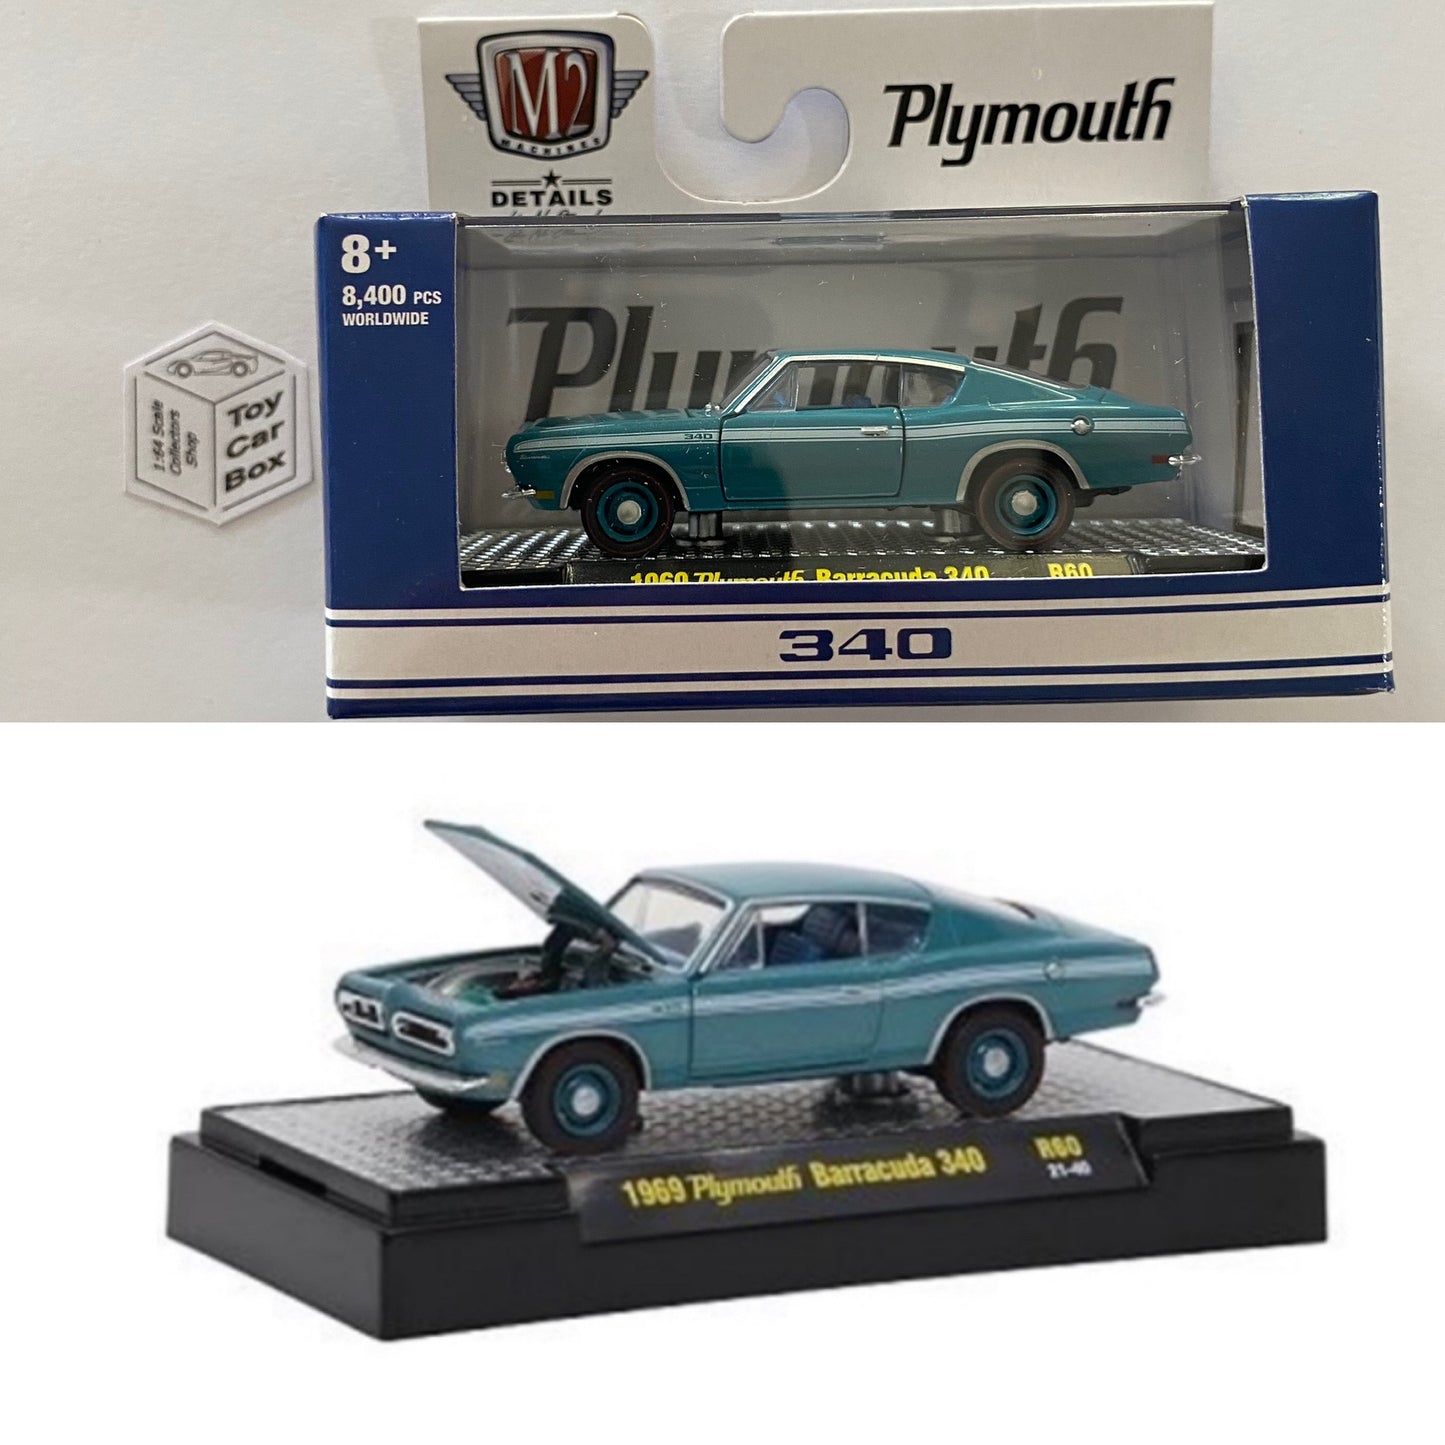 M2 MACHINES - 1969 Plymouth Barracuda 340 (Auto Muscle Gassers - 1/64 Scale) L05